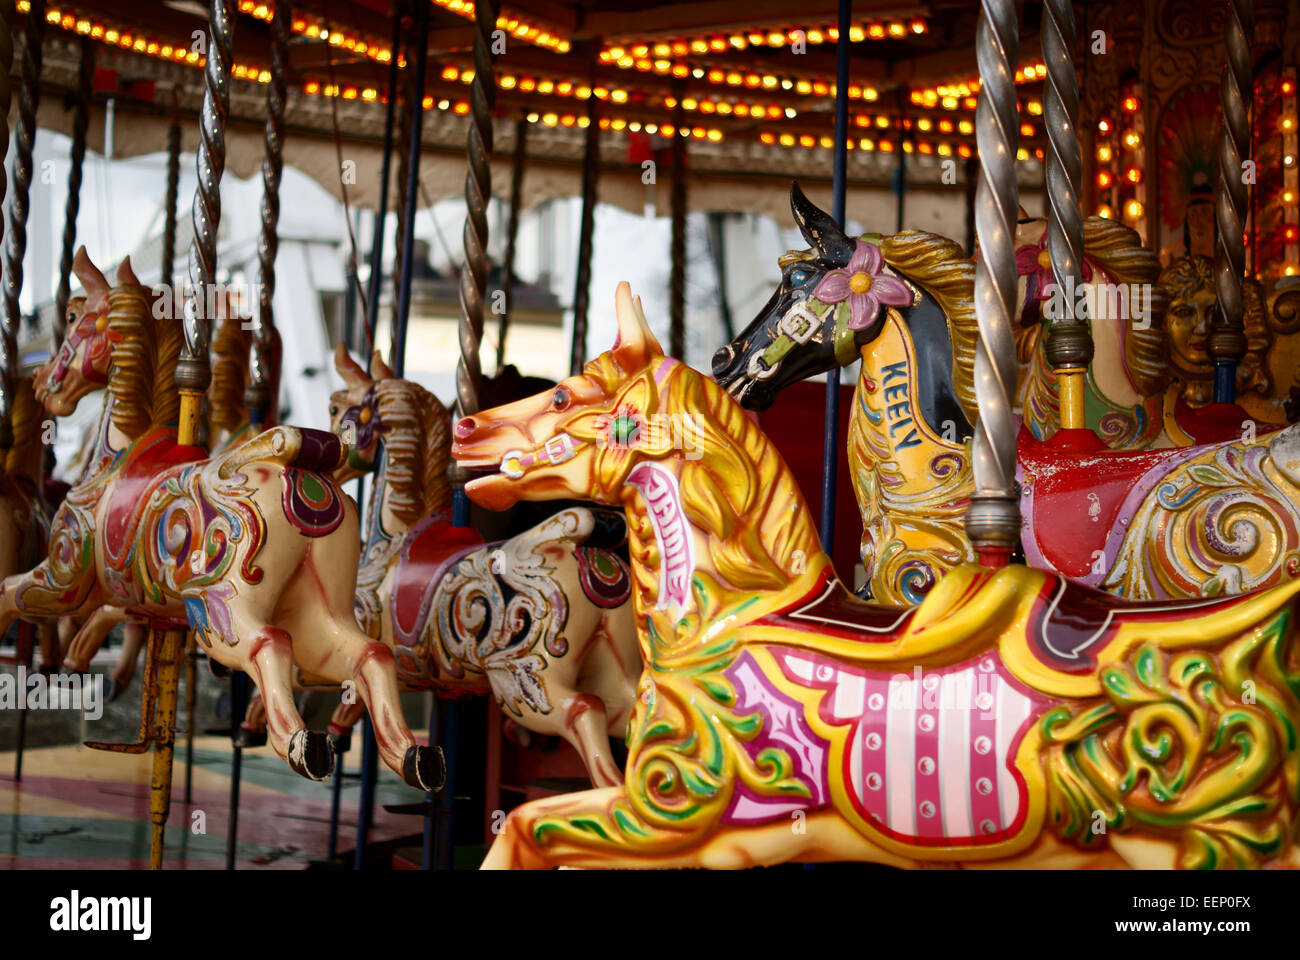 Wooden horses on an old fashioned fairground merry go round or carousel in the UK Stock Photo